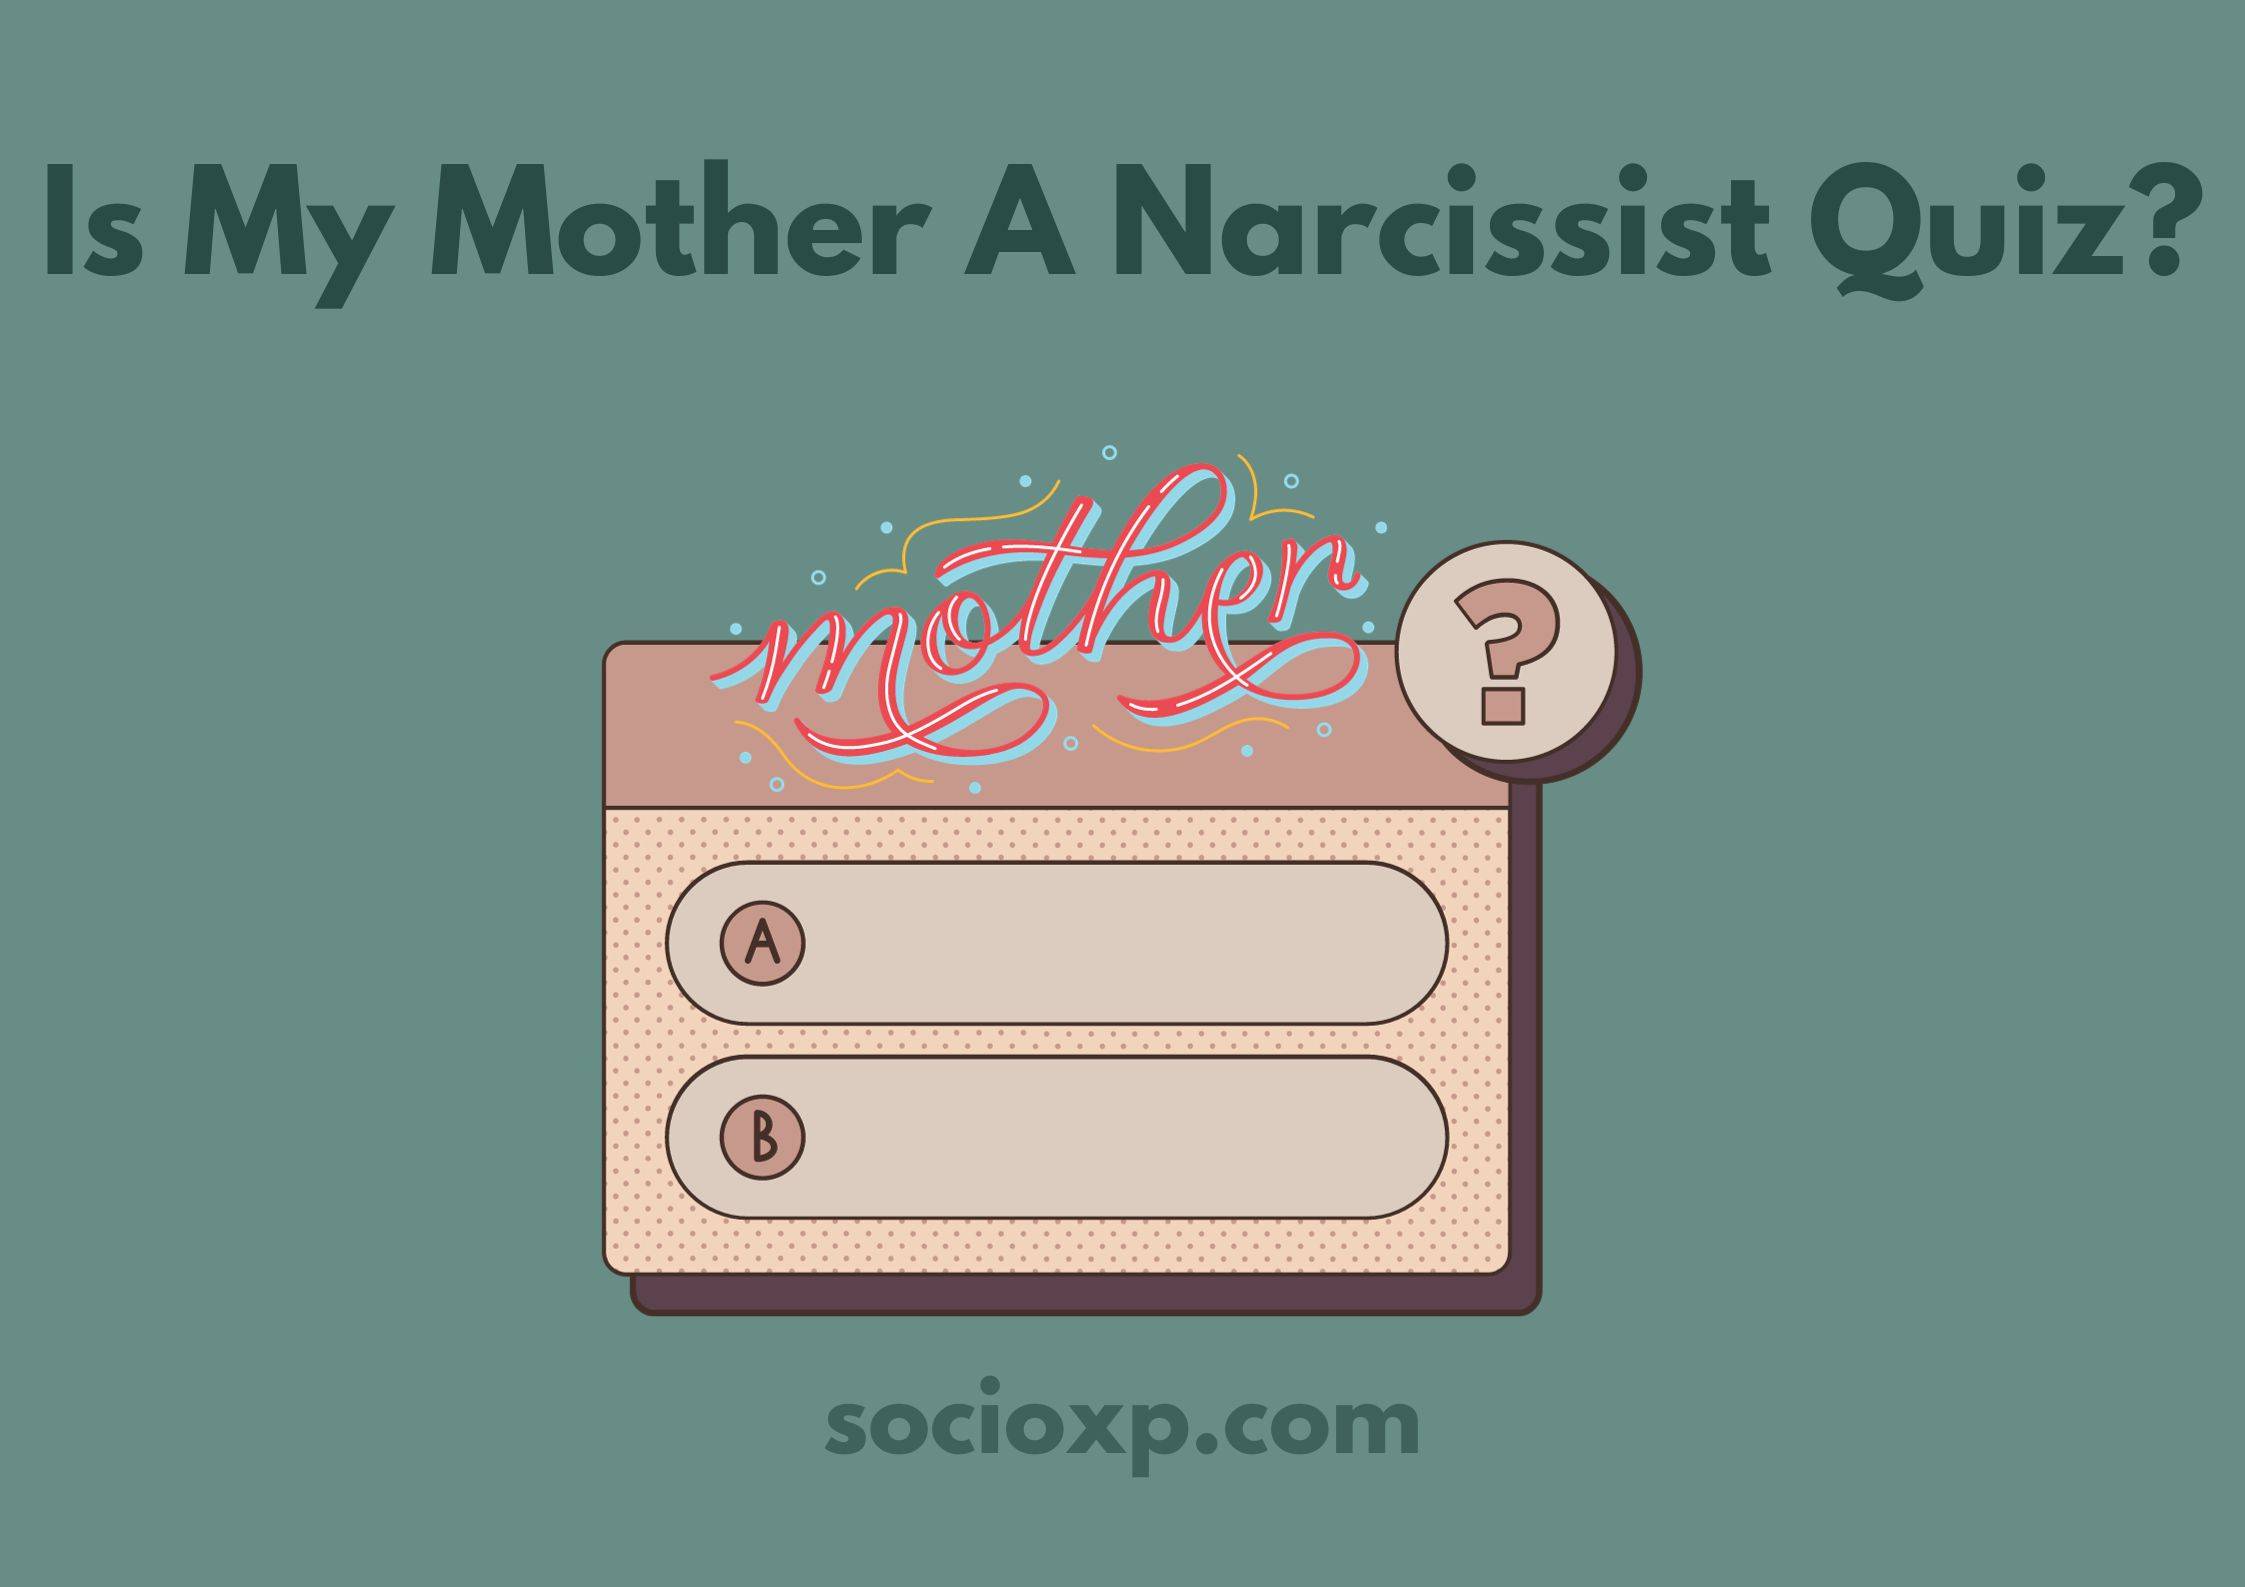 Is My Mother A Narcissist Quiz?